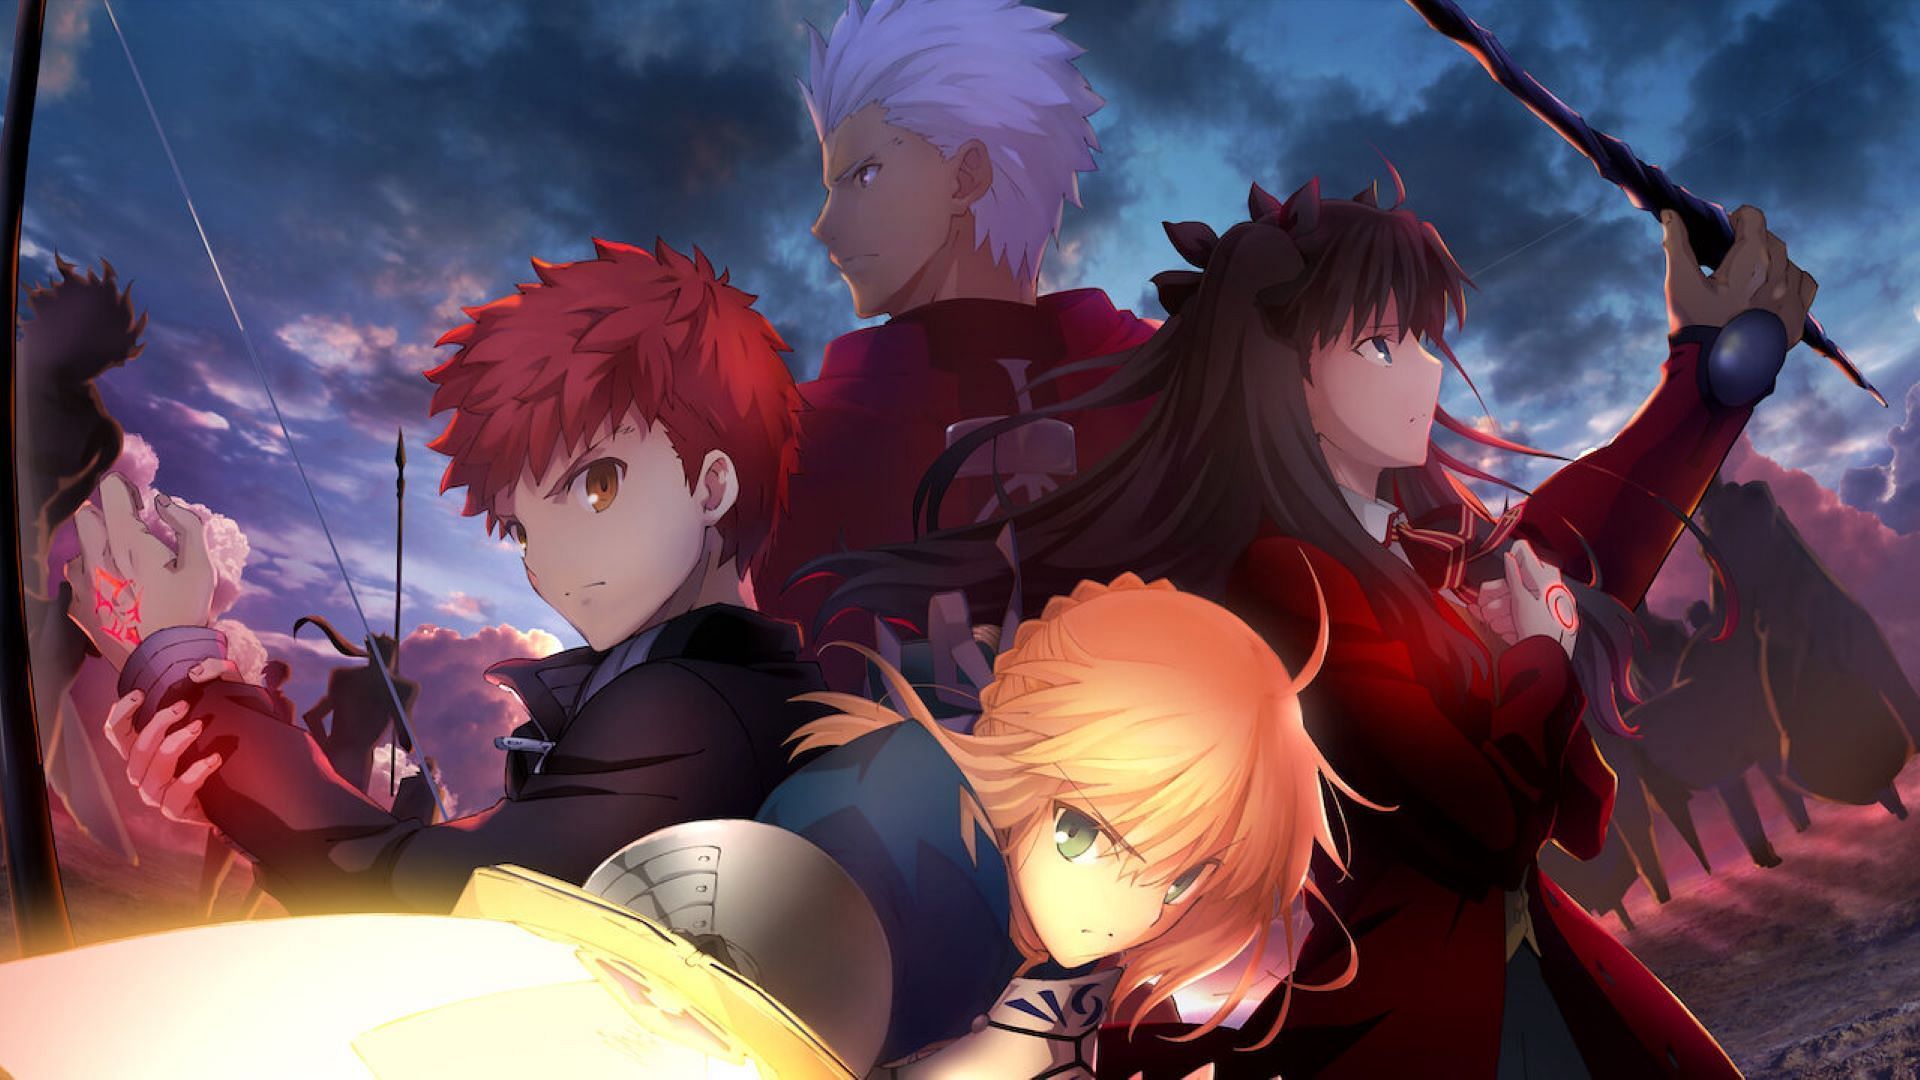 Promotional Artwork of Fate Stay Night, featuring the four main characters (Image via Studio Ufotable)